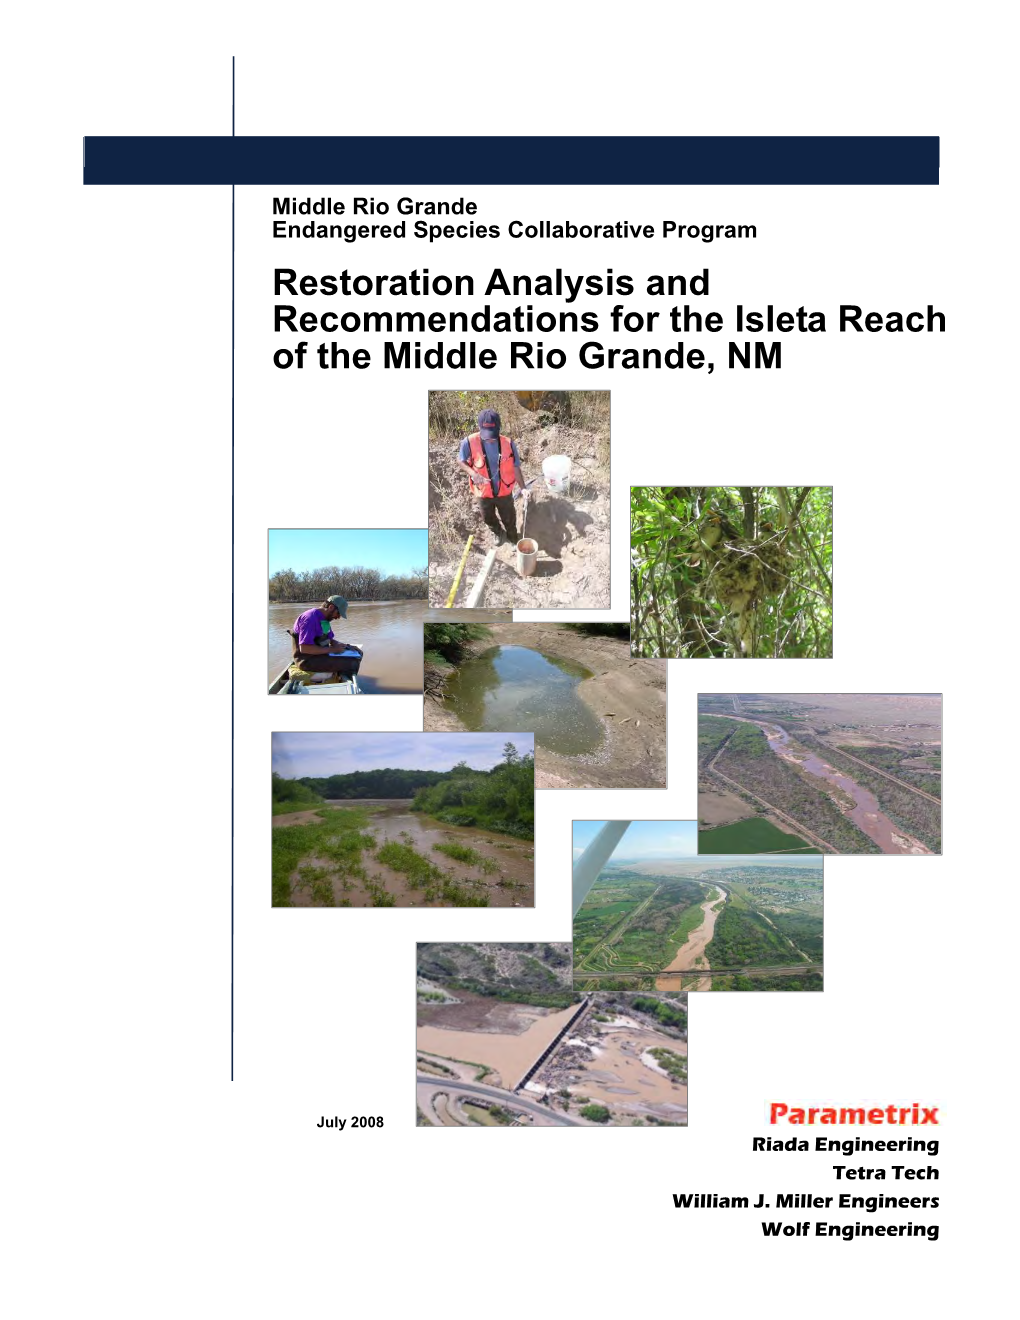 Restoration Analysis and Recommendations for the Isleta Reach of the Middle Rio Grande, NM